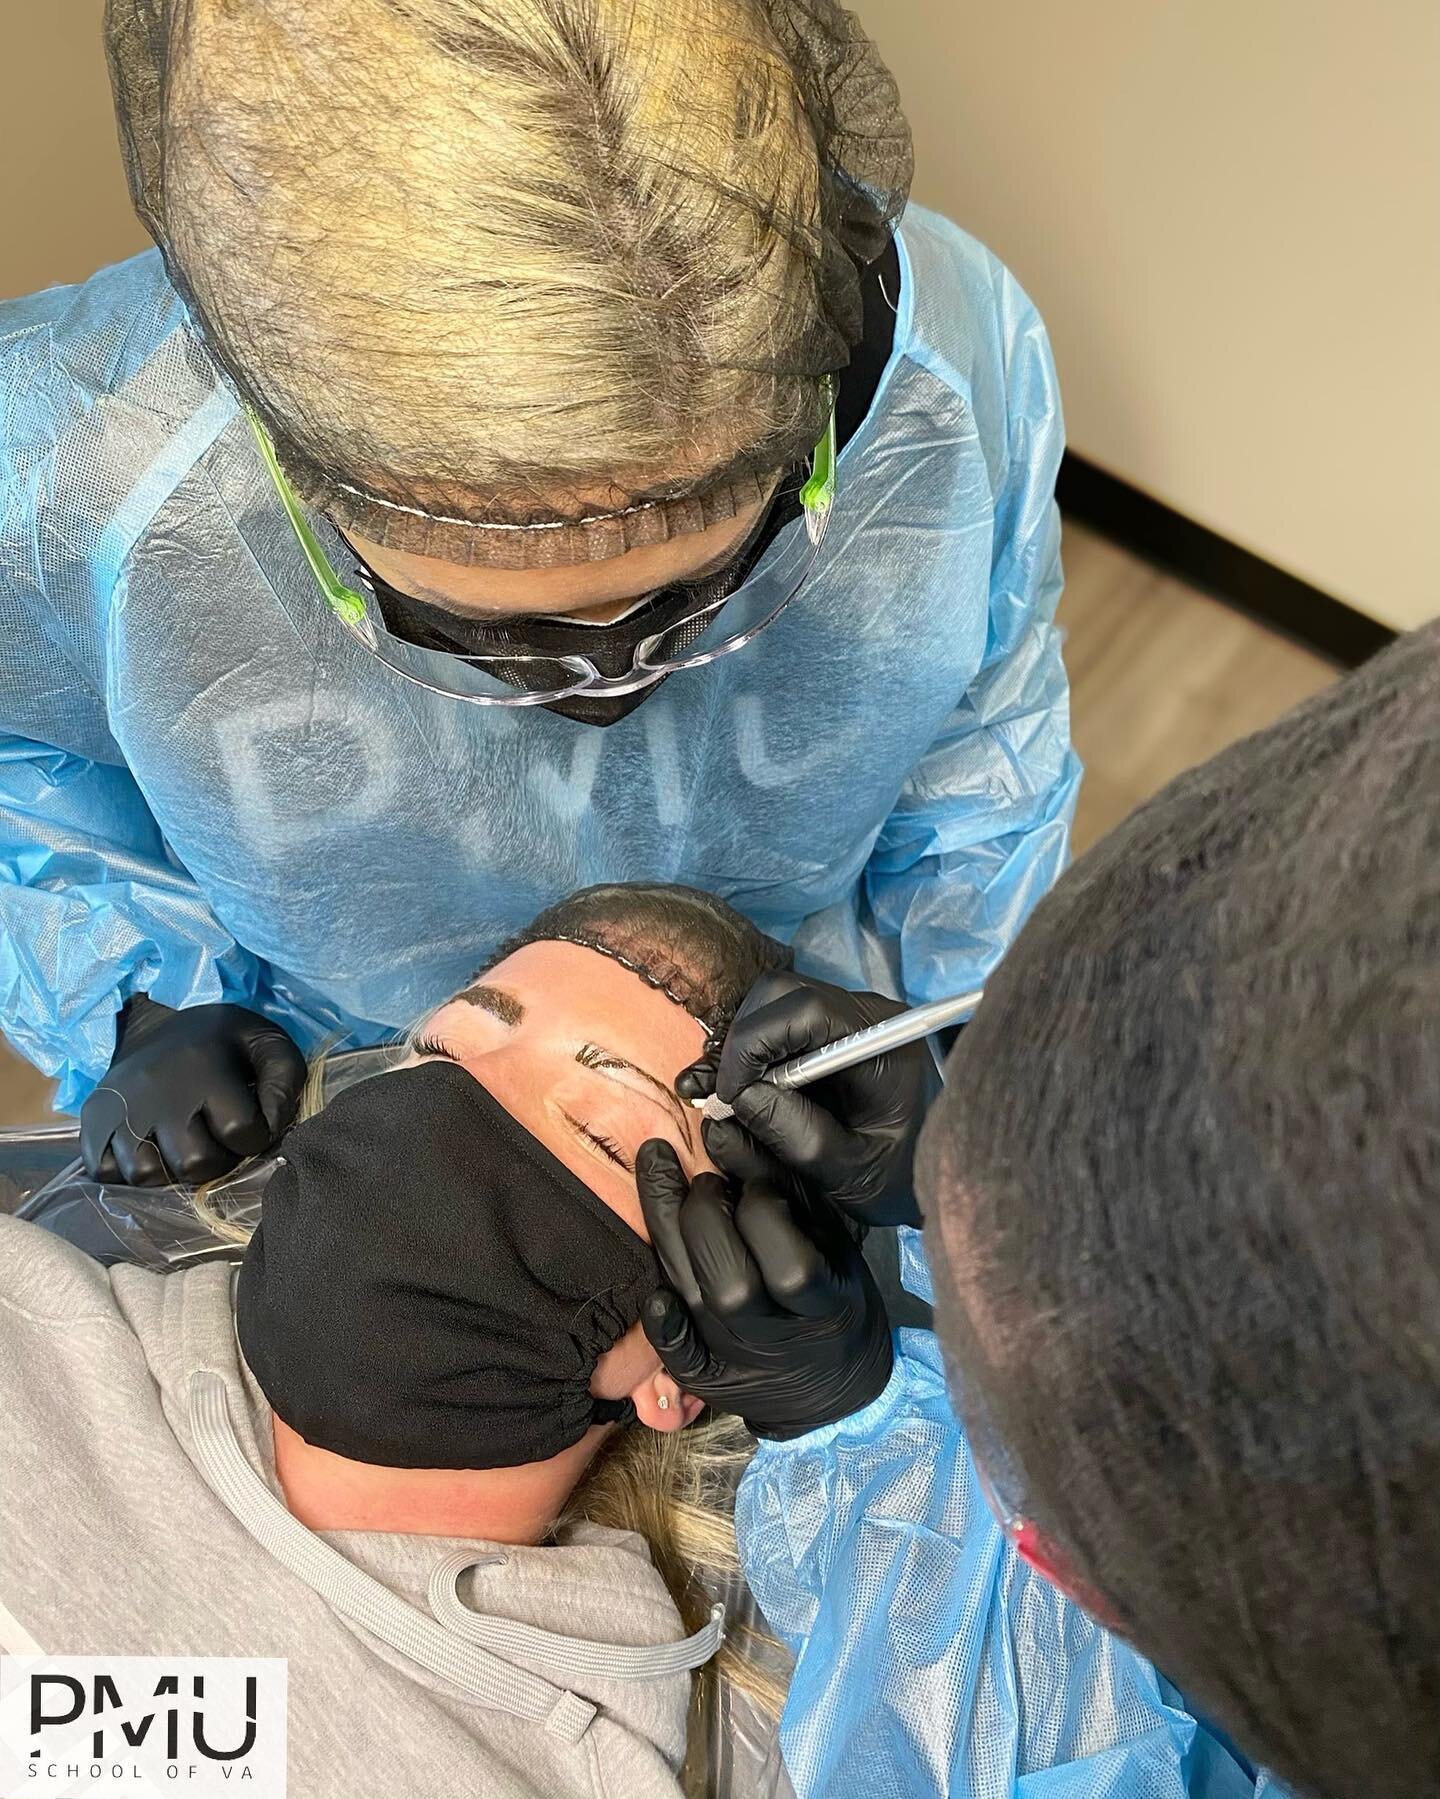 Another one of our talented students, @cheryllynn818 ,  microblading a live model during practicals with instructor Sarah observing her every move with proper guidance. 

At PMUSchoolVA, we truly understand the value of working on real live models to